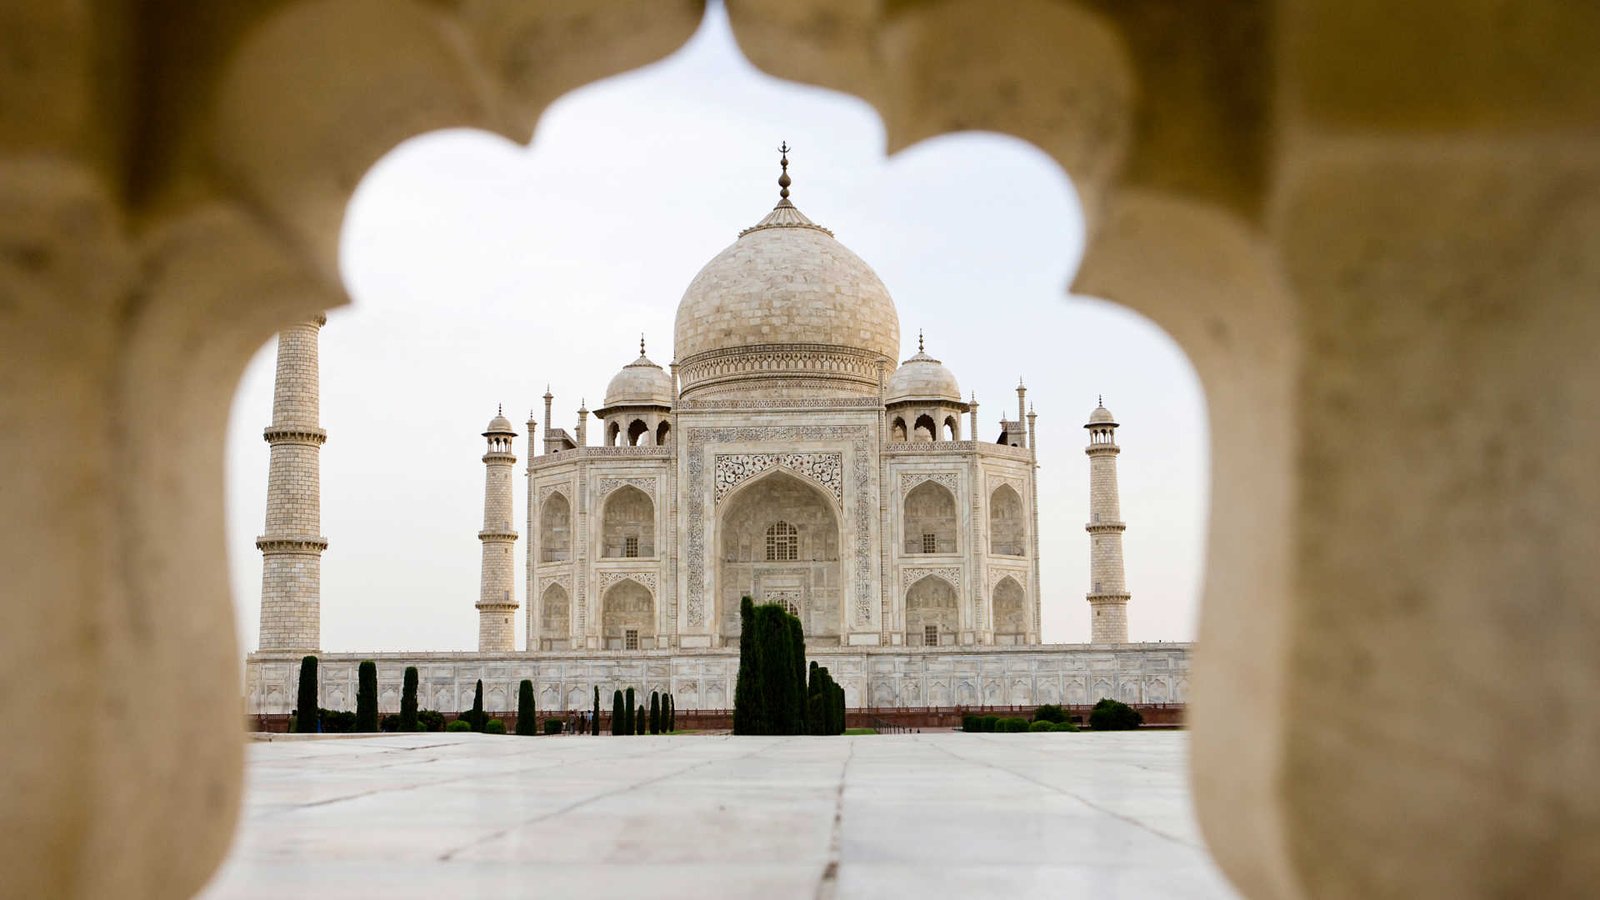 White Marble brought from Rajasthan was used to build the Taj Mahal